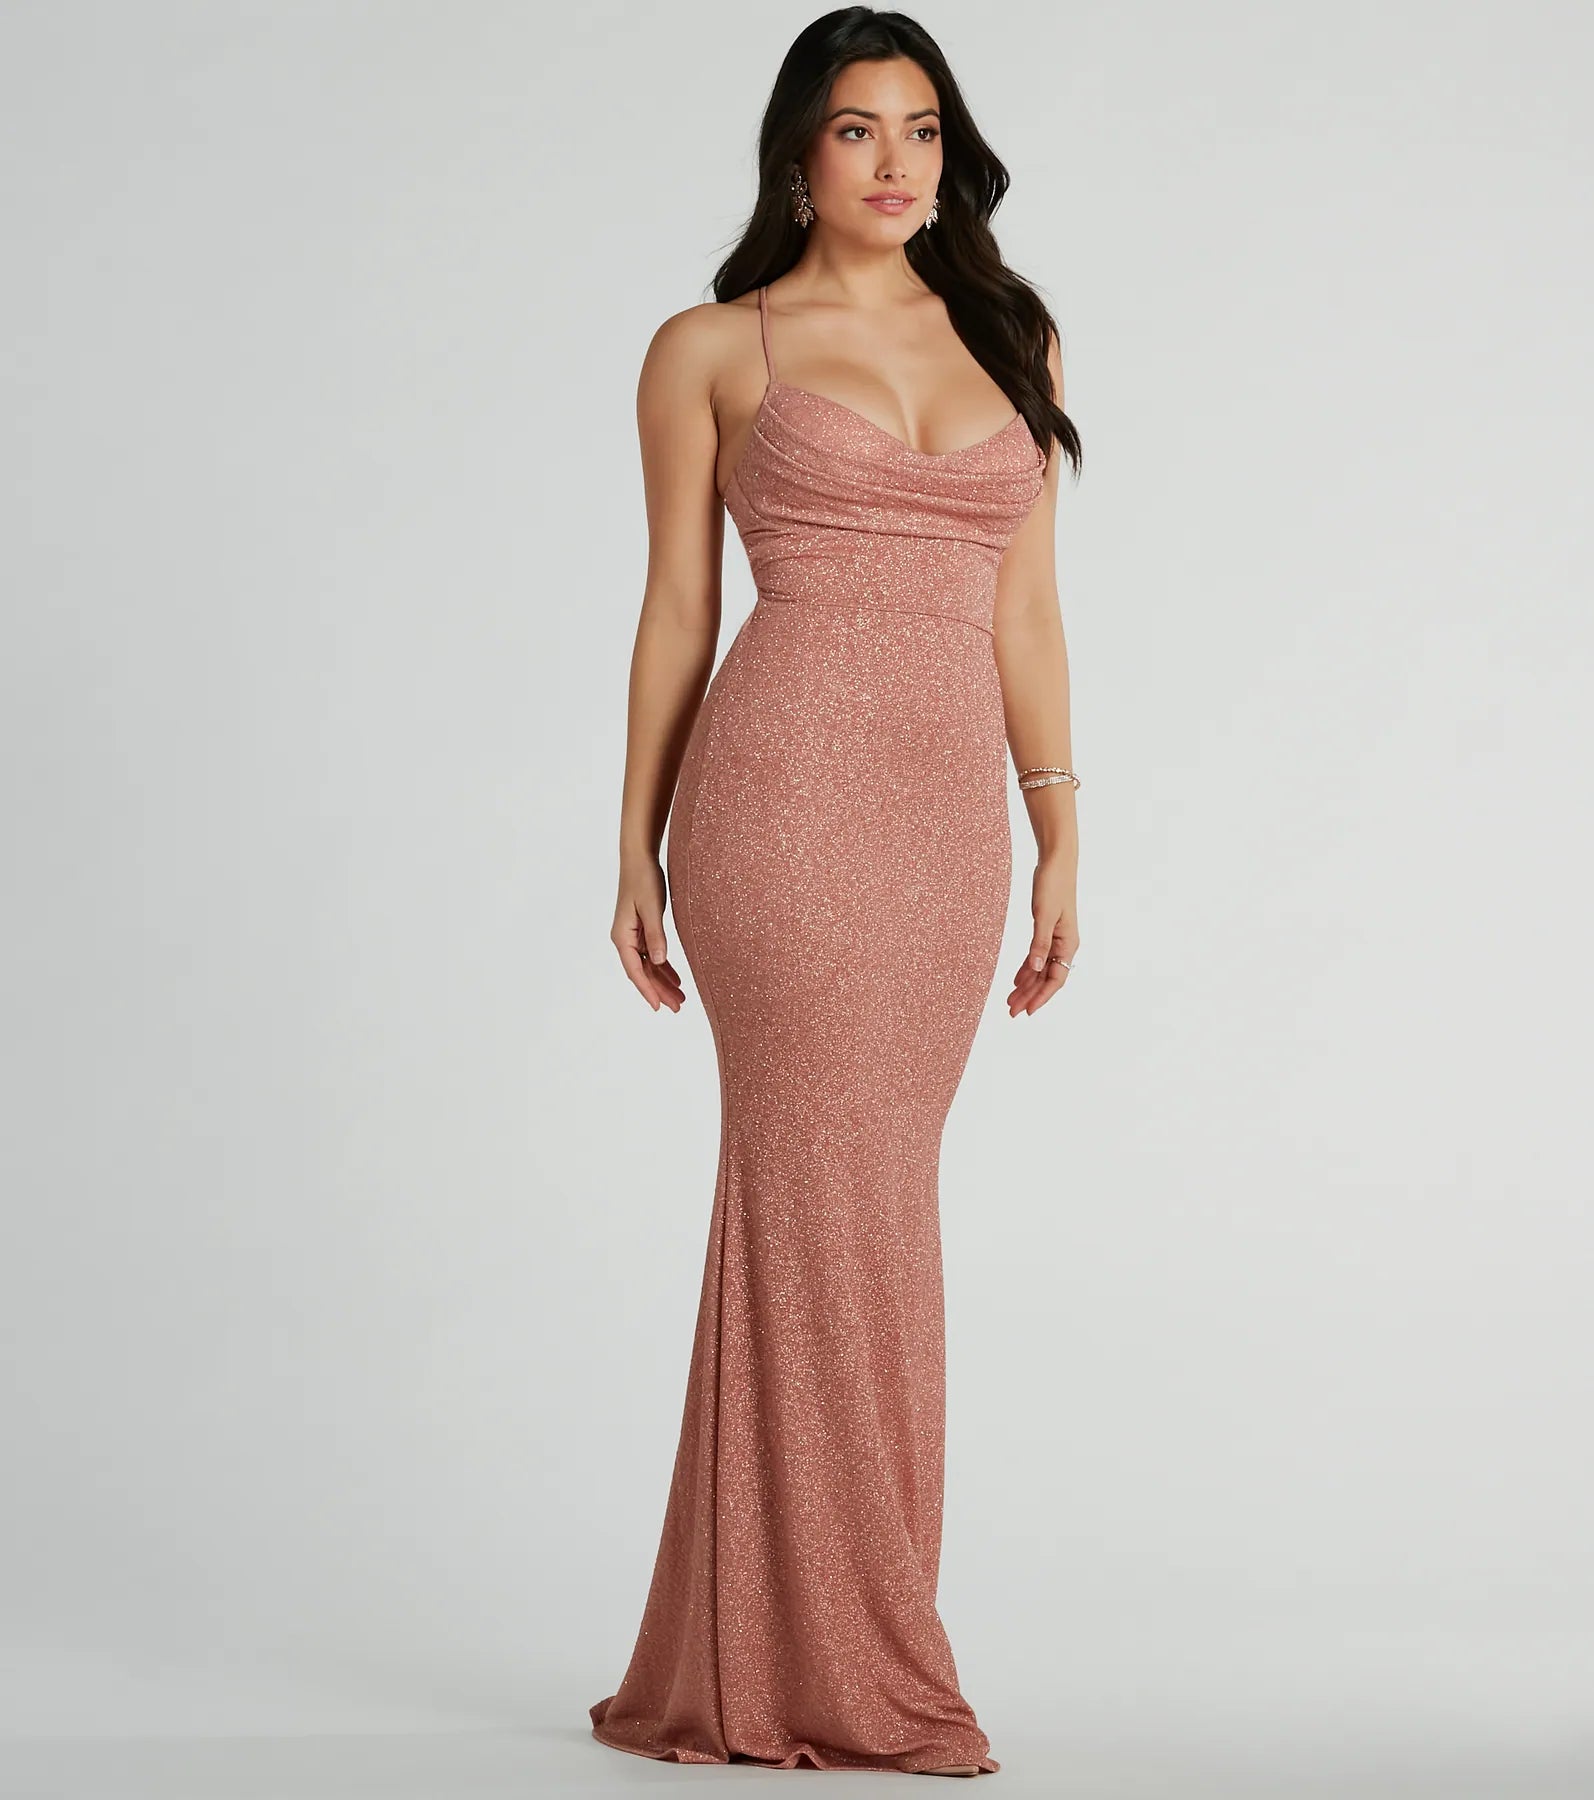 Sophisticated Spaghetti Strap Floor Length Glittering Stretchy Lace-Up Knit Cowl Neck Mermaid Prom Dress/Party Dress